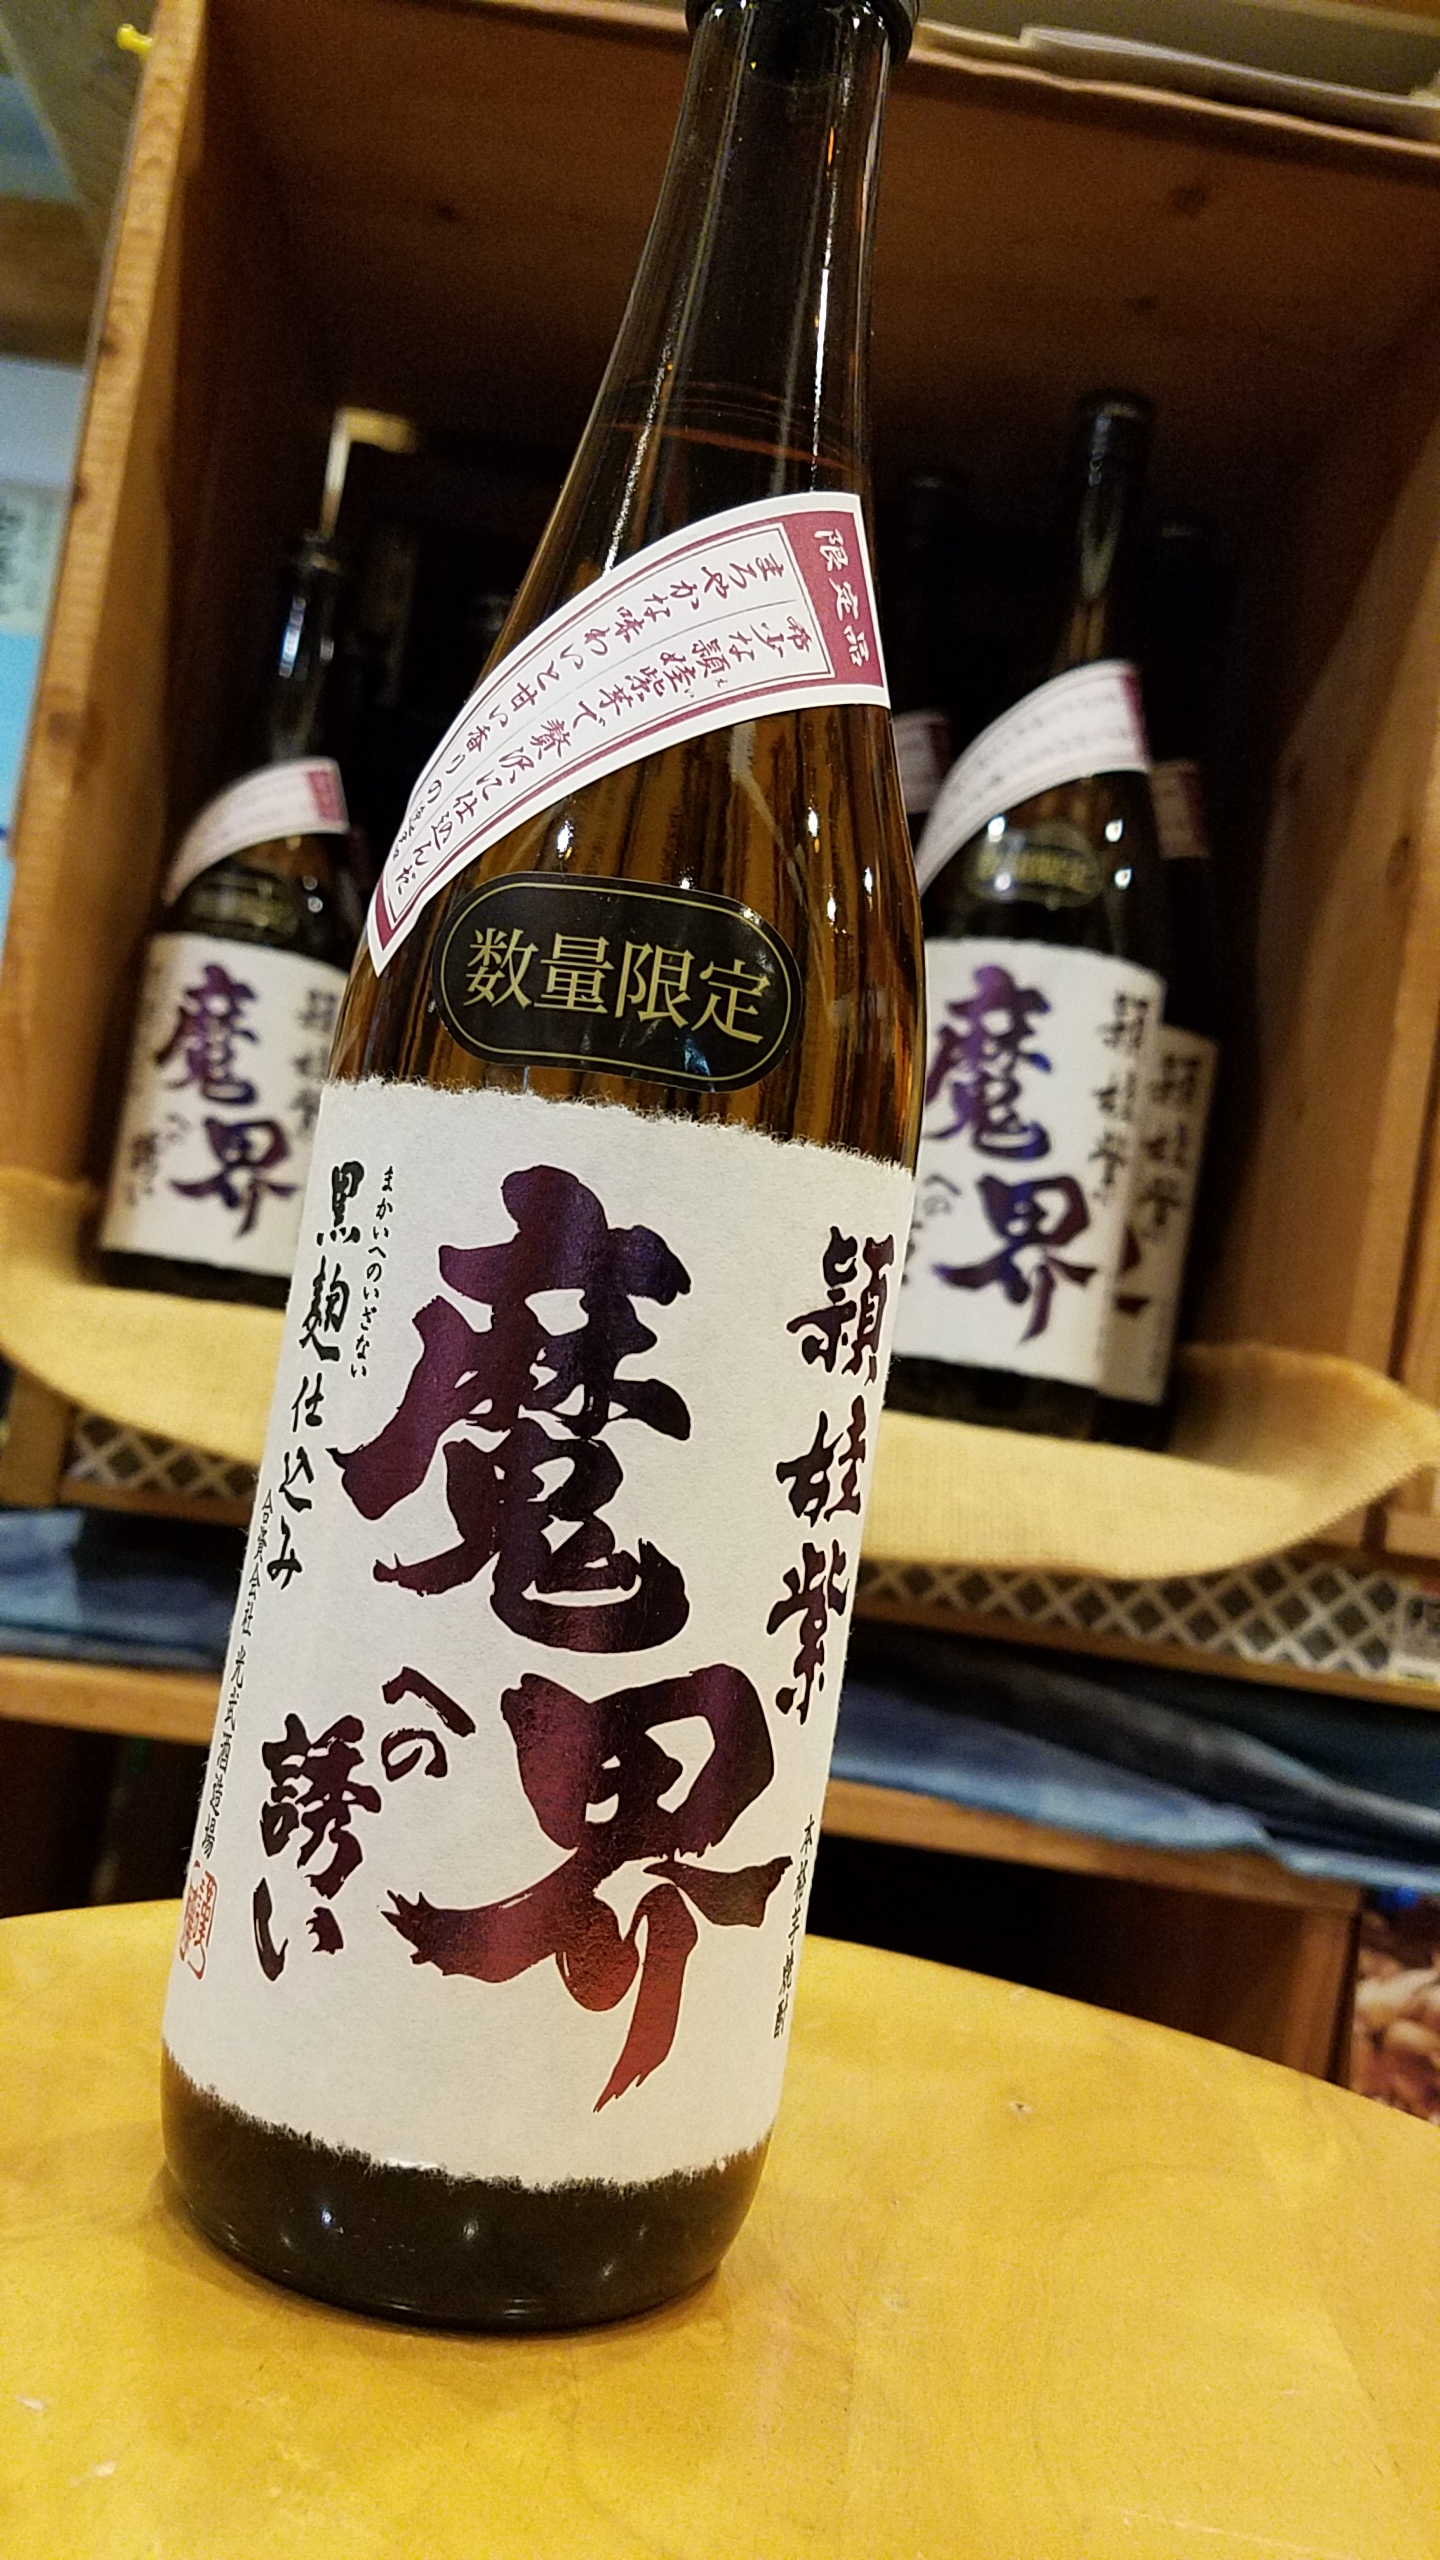 You are currently viewing 希少な頴娃（えい）紫芋で贅沢に仕込んだ芋焼酎！